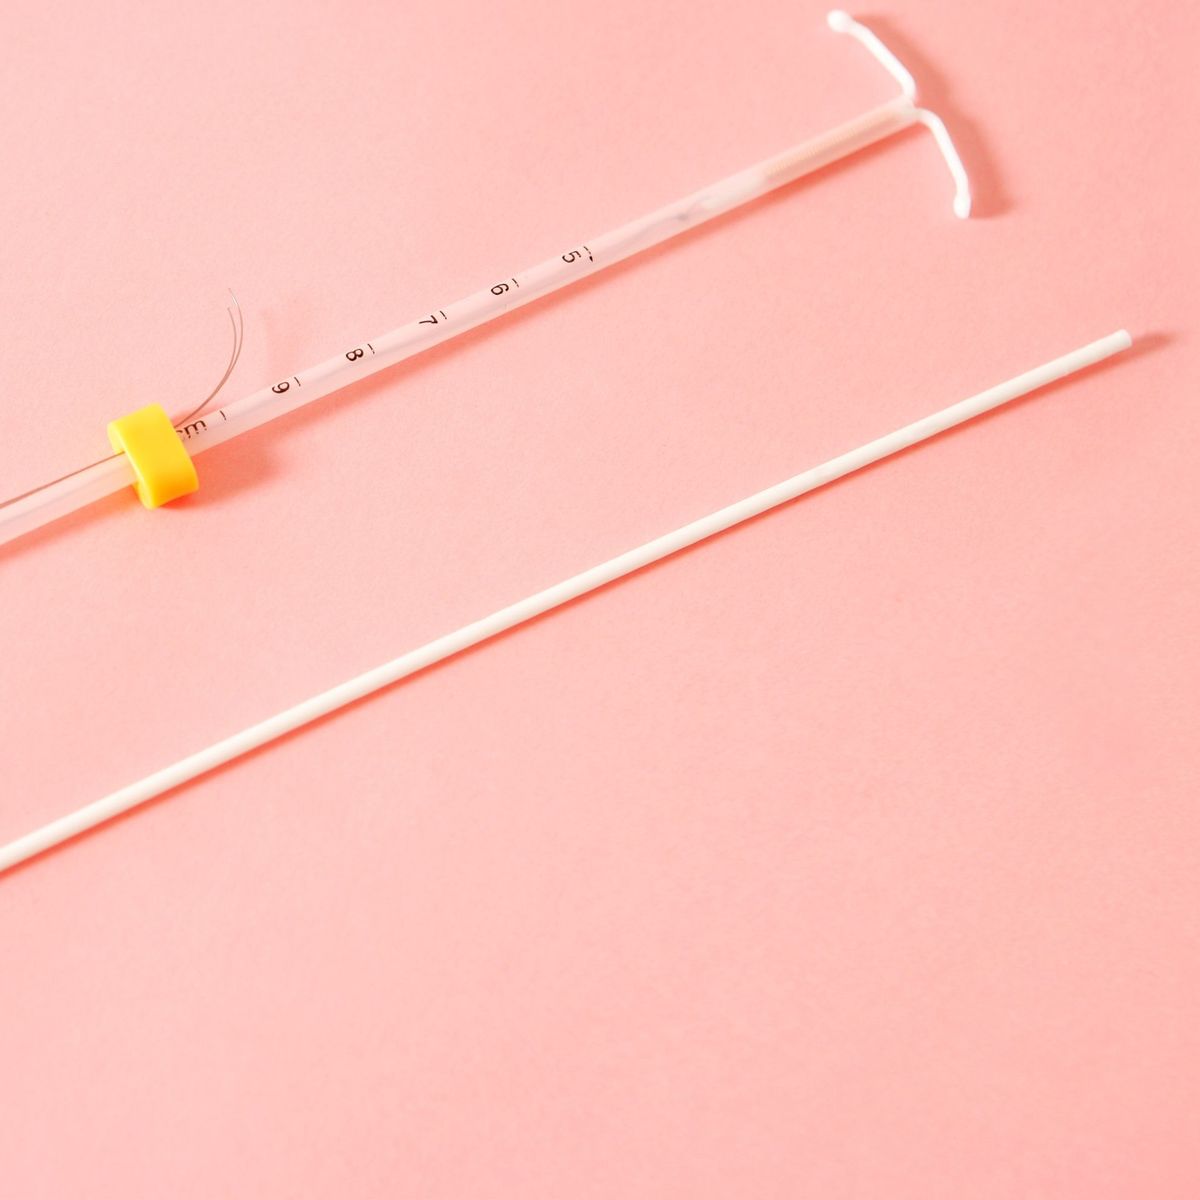 Should You Get an IUD? 5 Stories from Real Women to Help You Decide